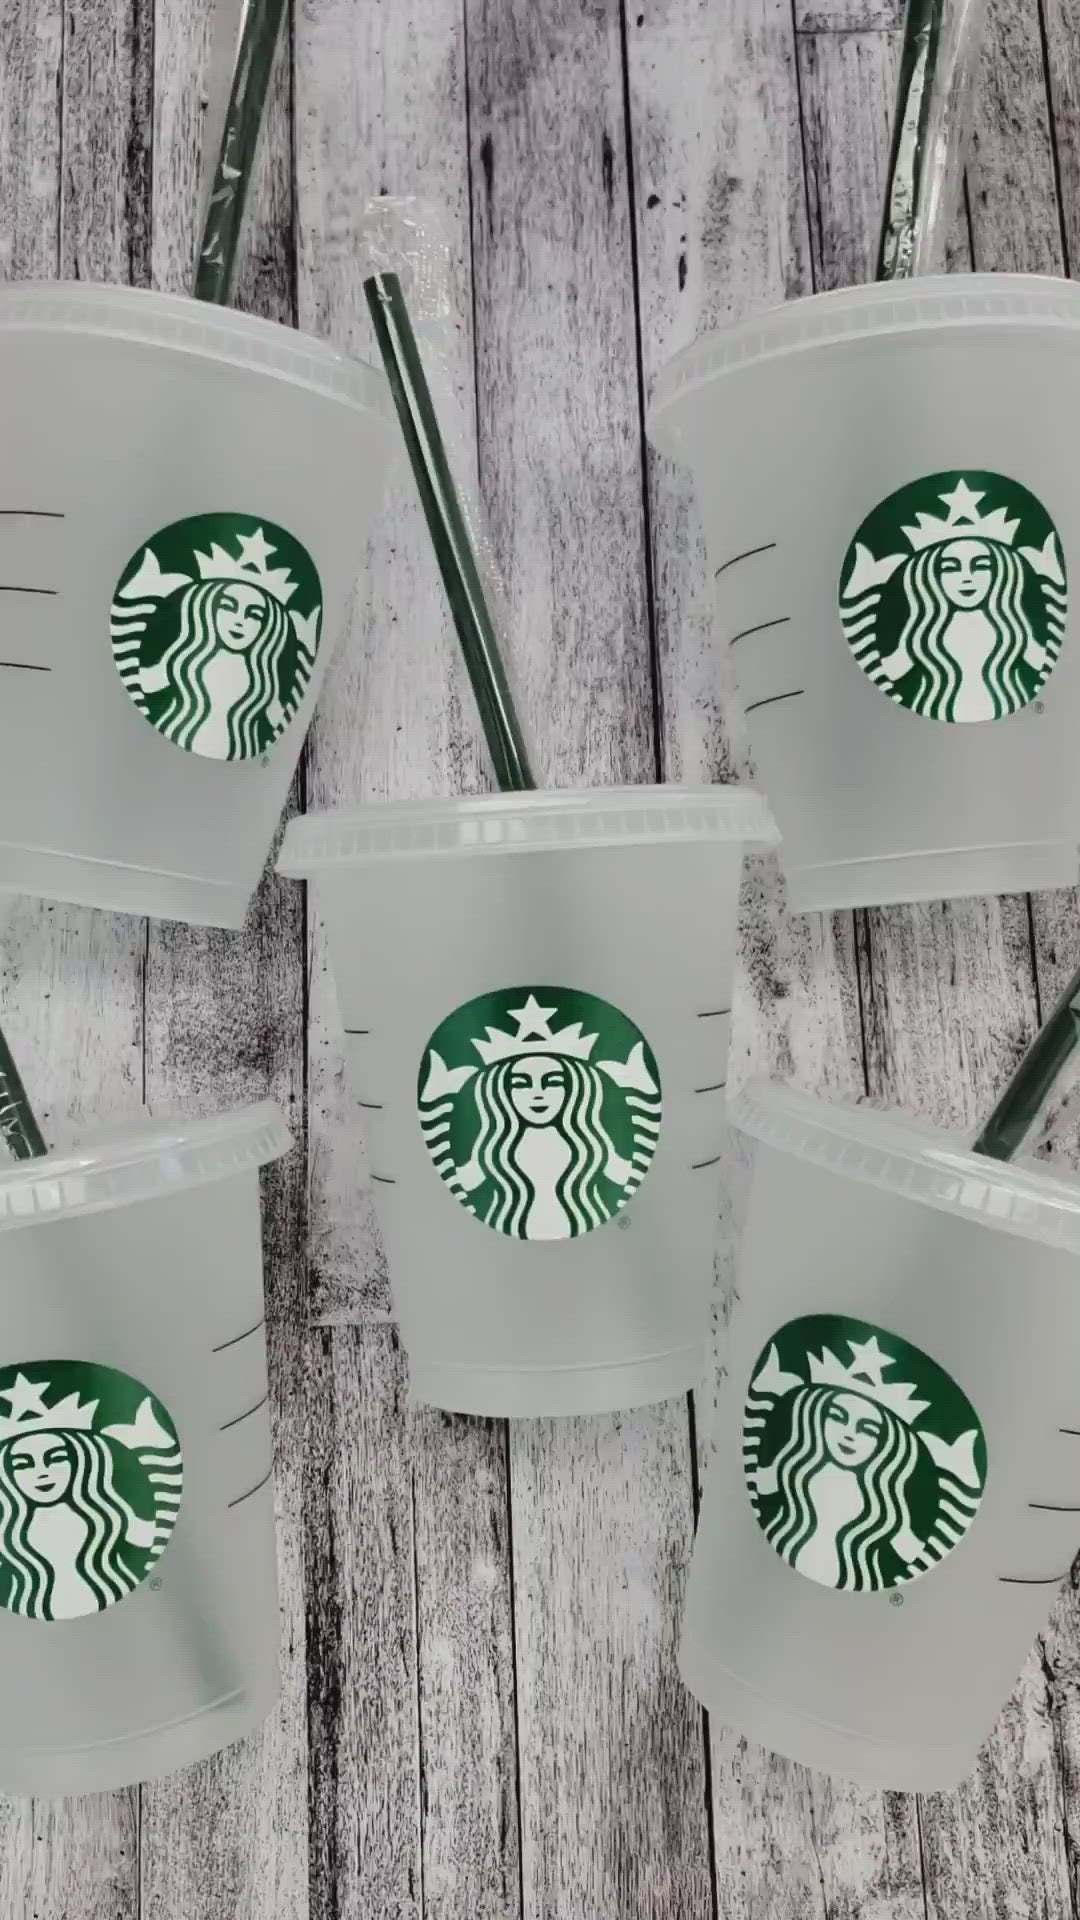 Mommy and Me Cup, Kids Starbucks, Starbucks Mommy and Me Cup, Kids  Starbucks Cup, Starbucks Sippy Cup, Mommy and Mini Cup